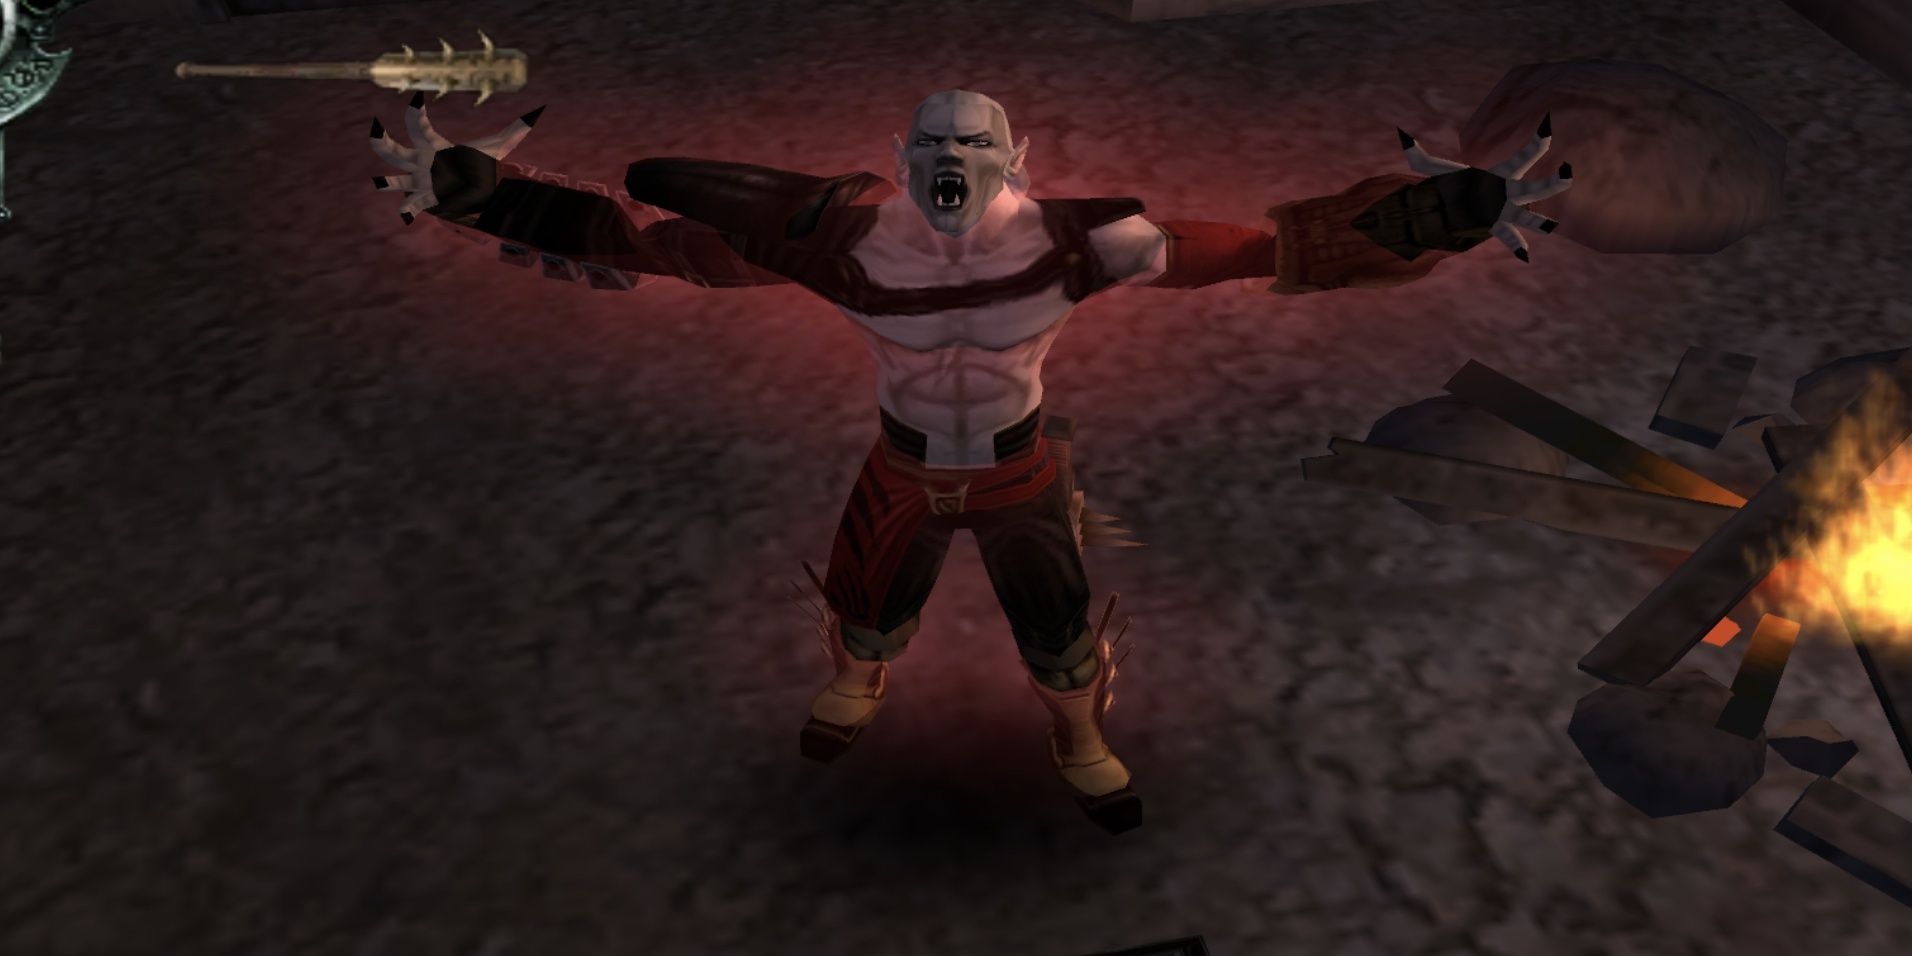 blood omen 2 kain in scary pose